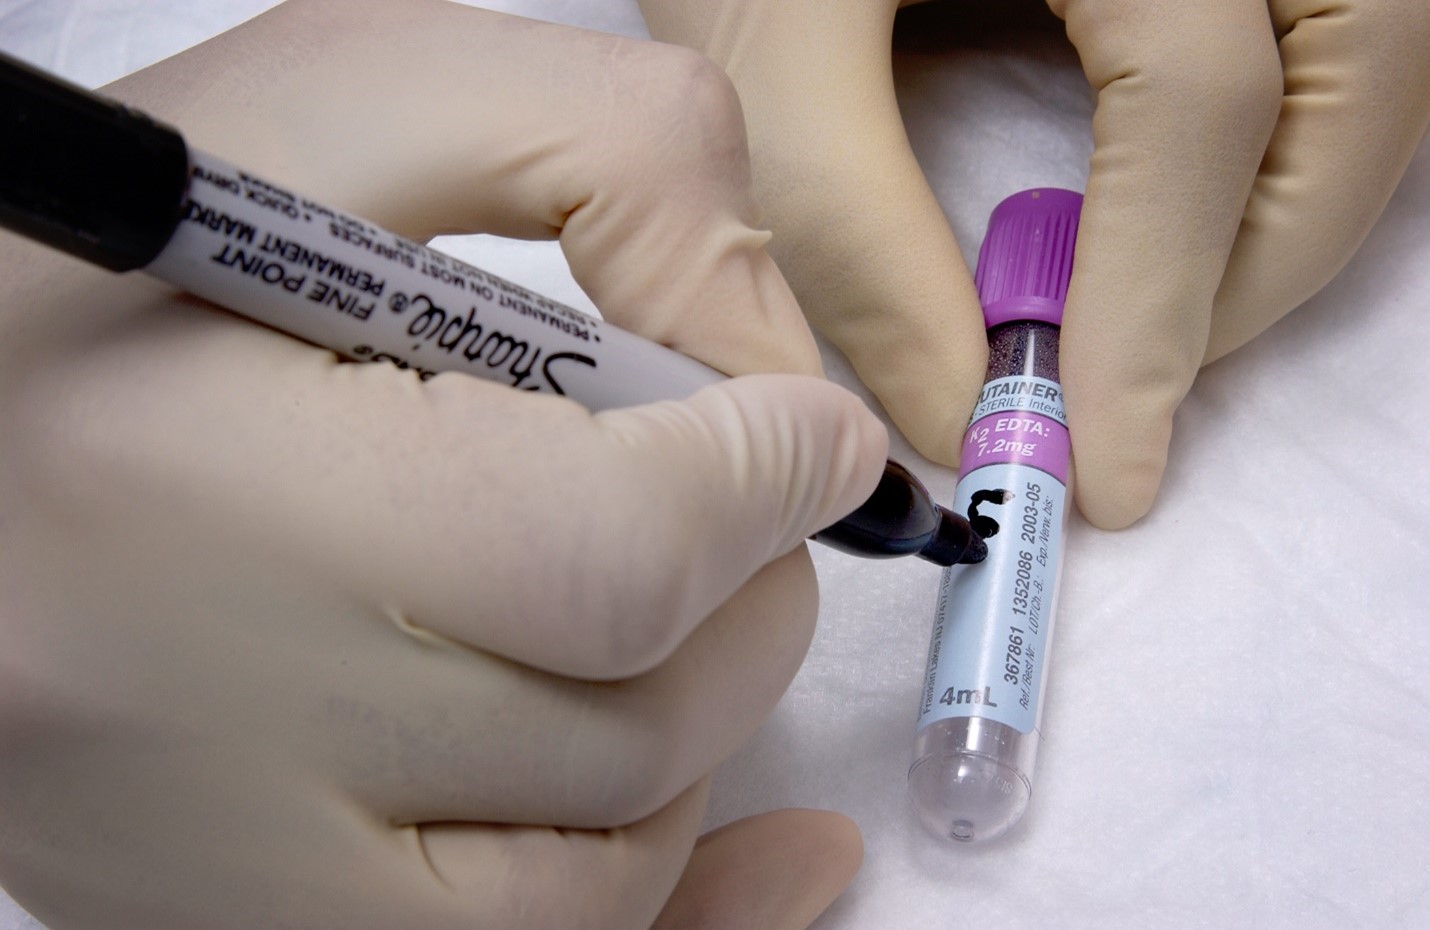 "A laboratory tech with gloved hands holds a purple top vacutainer tube while they write on the container's label with a fine-tipped permanent marker. "